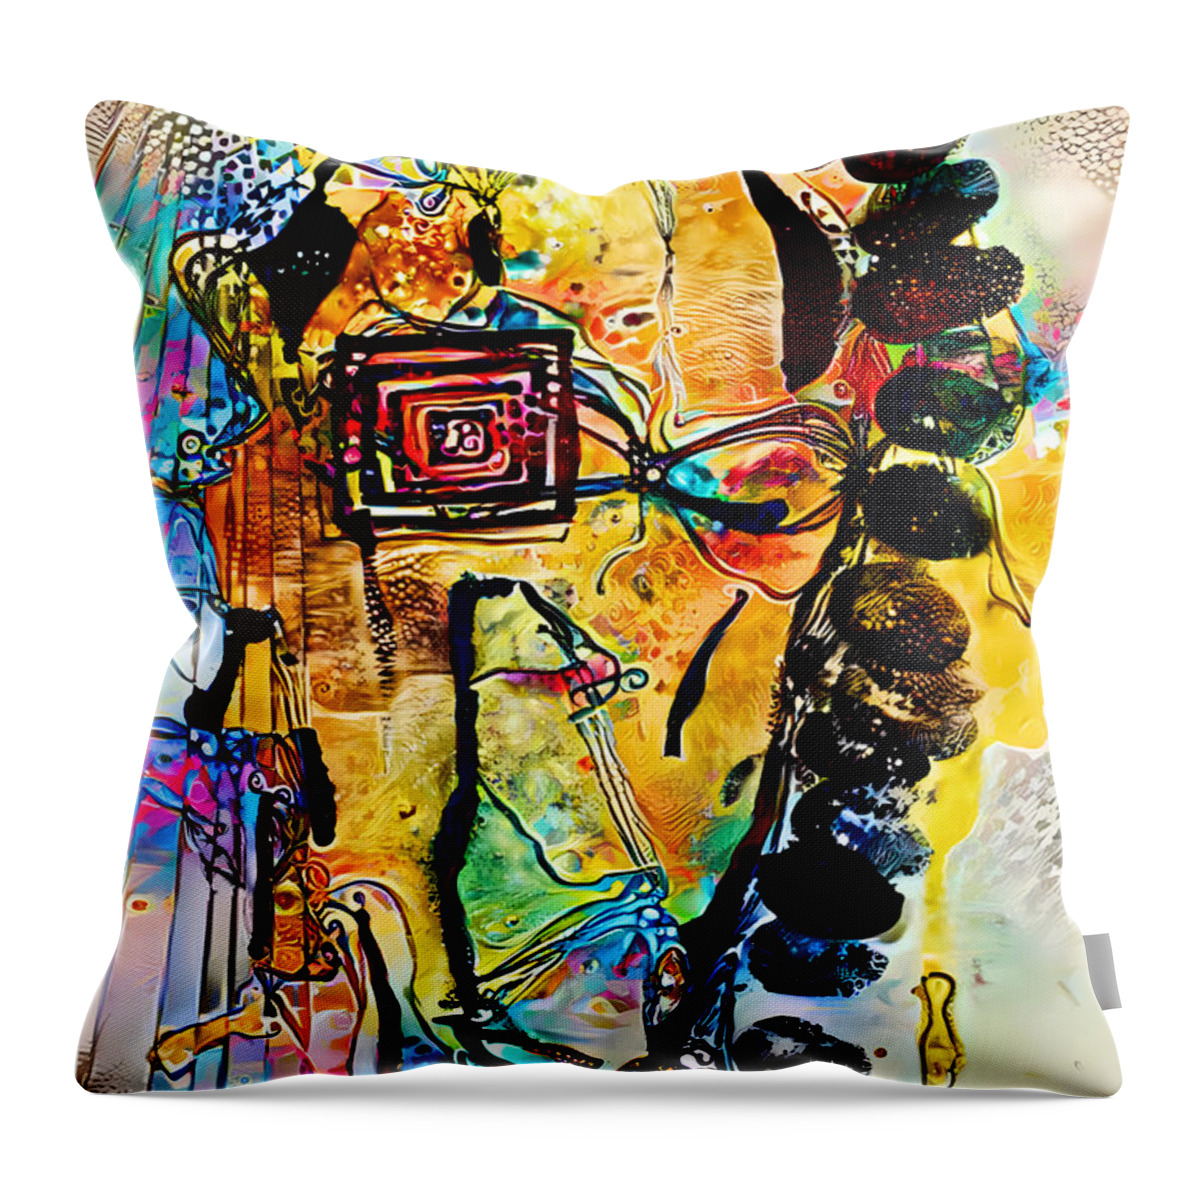 Contemporary Art Throw Pillow featuring the digital art 107 by Jeremiah Ray